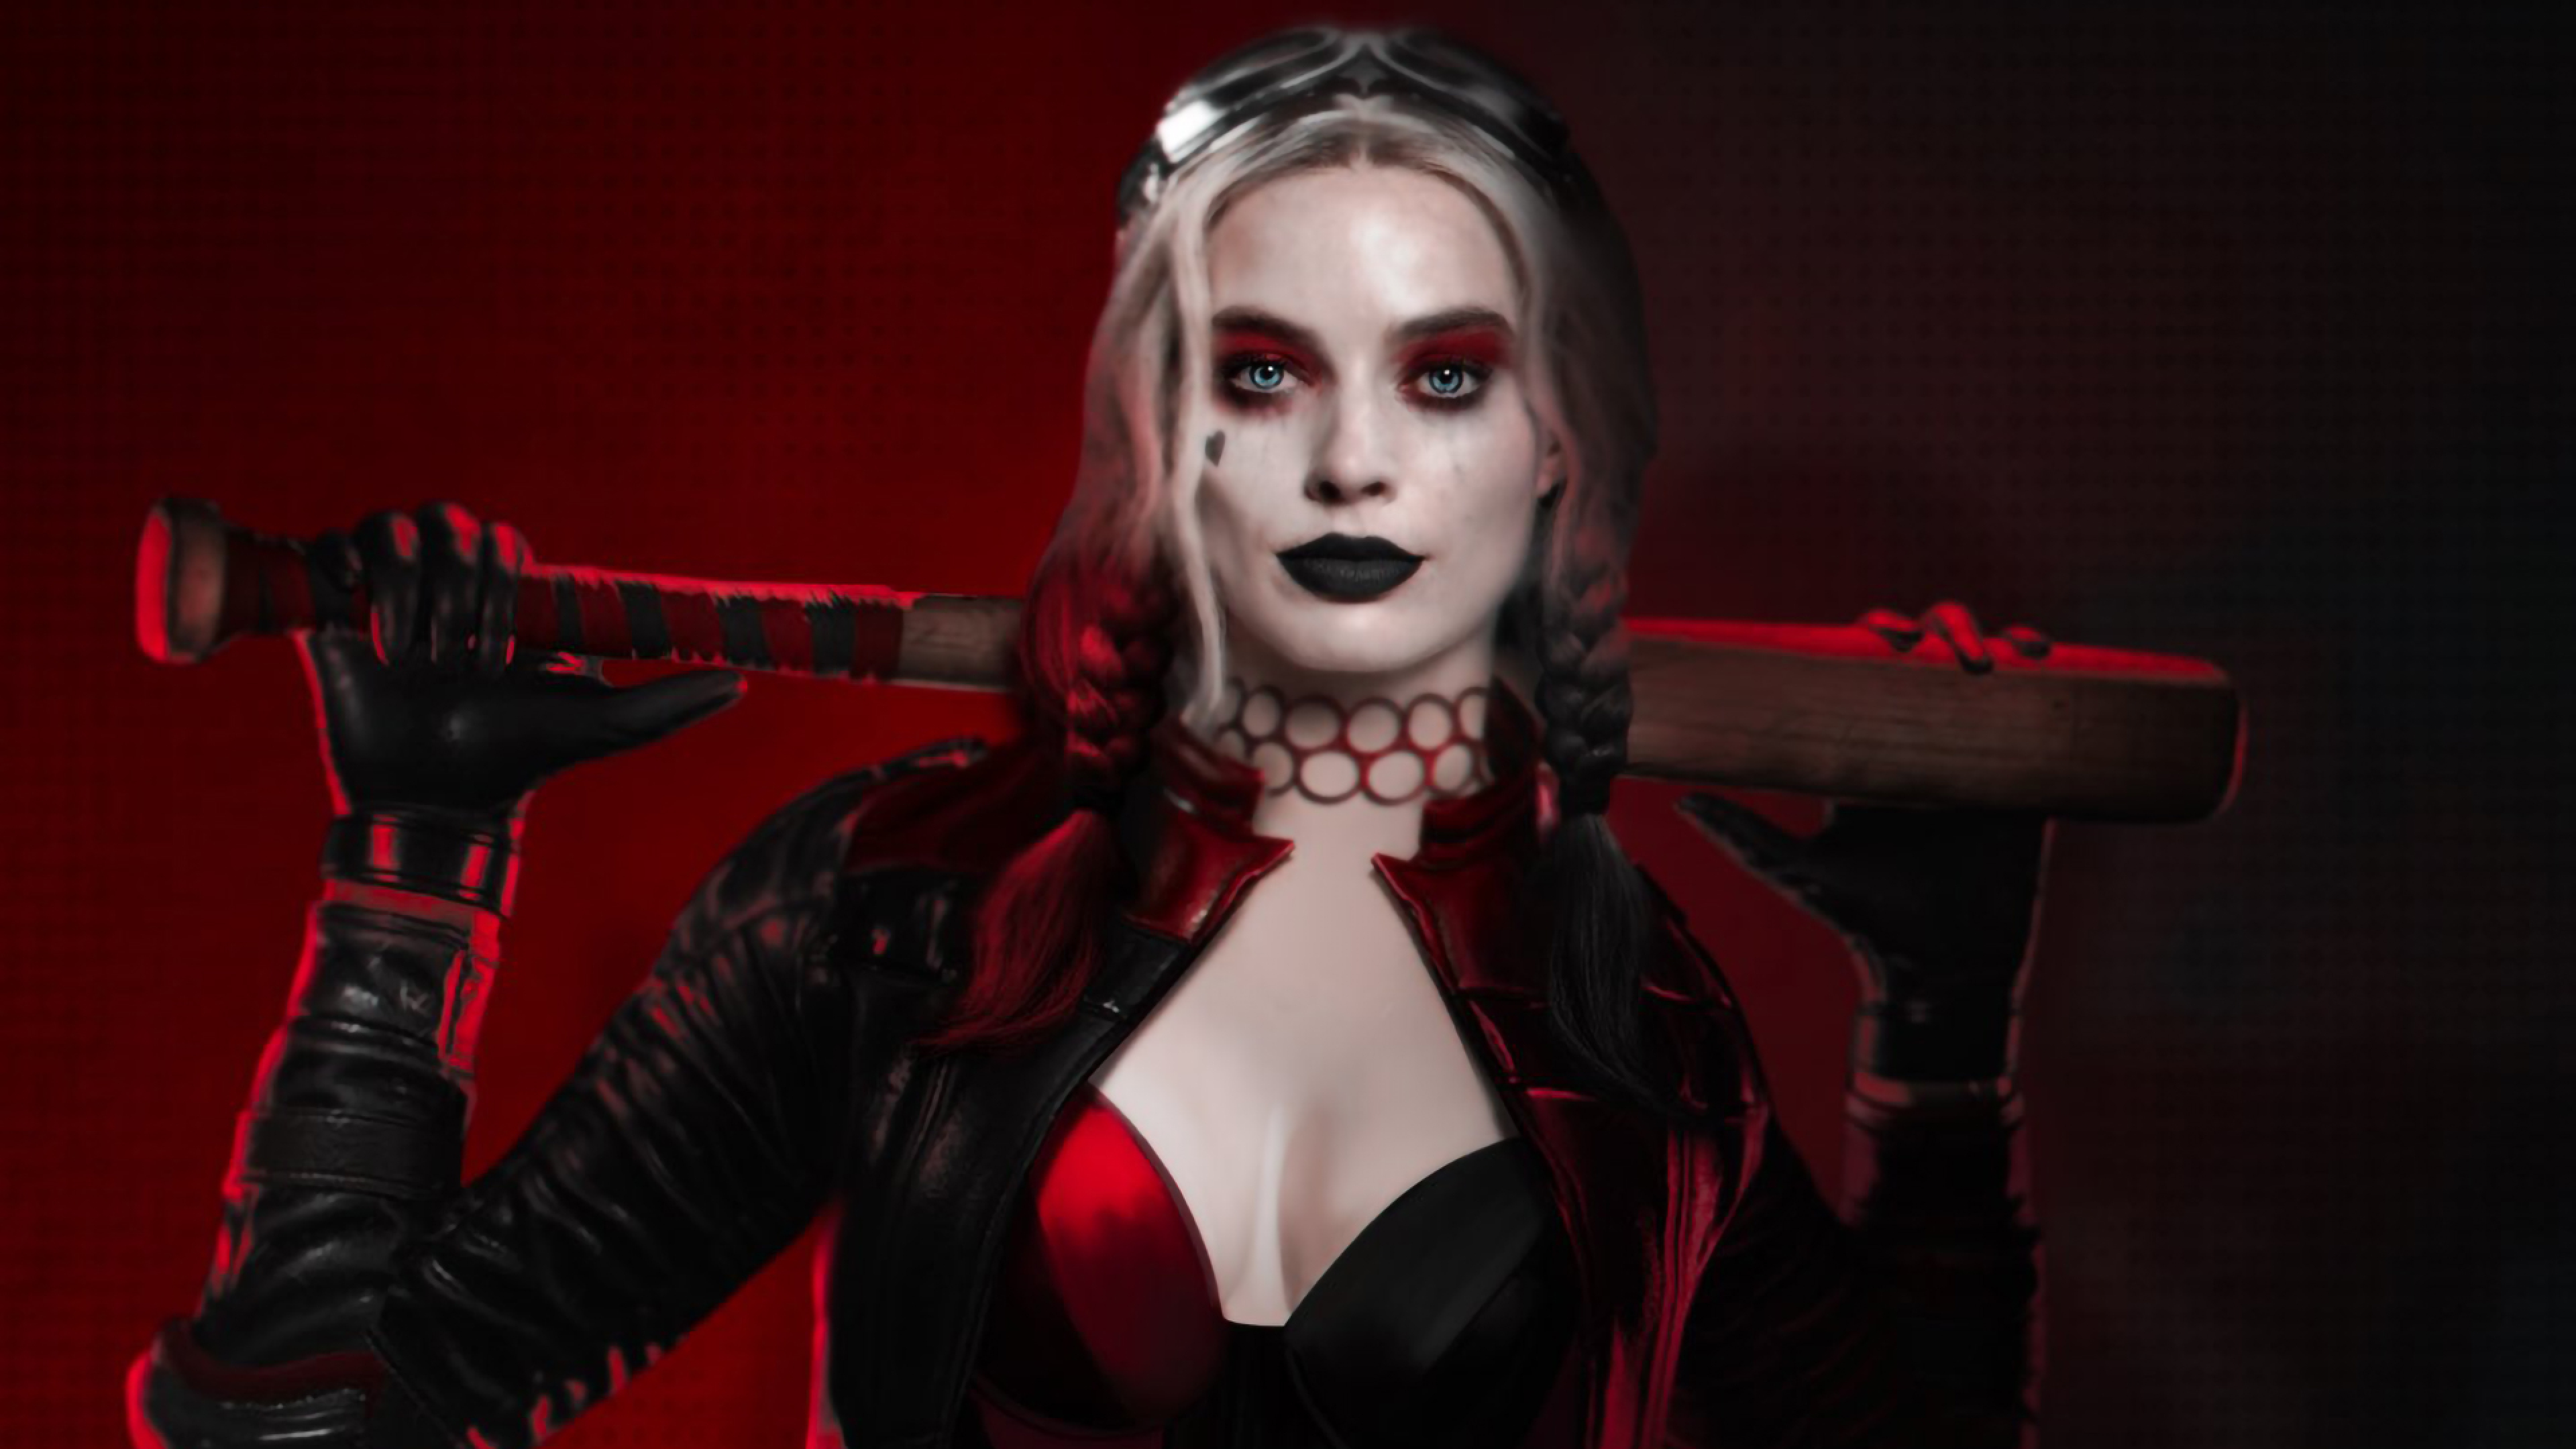 3840x2160 Margot Robbie as Harley Quinn The Suicide Squad 4K Wallpaper